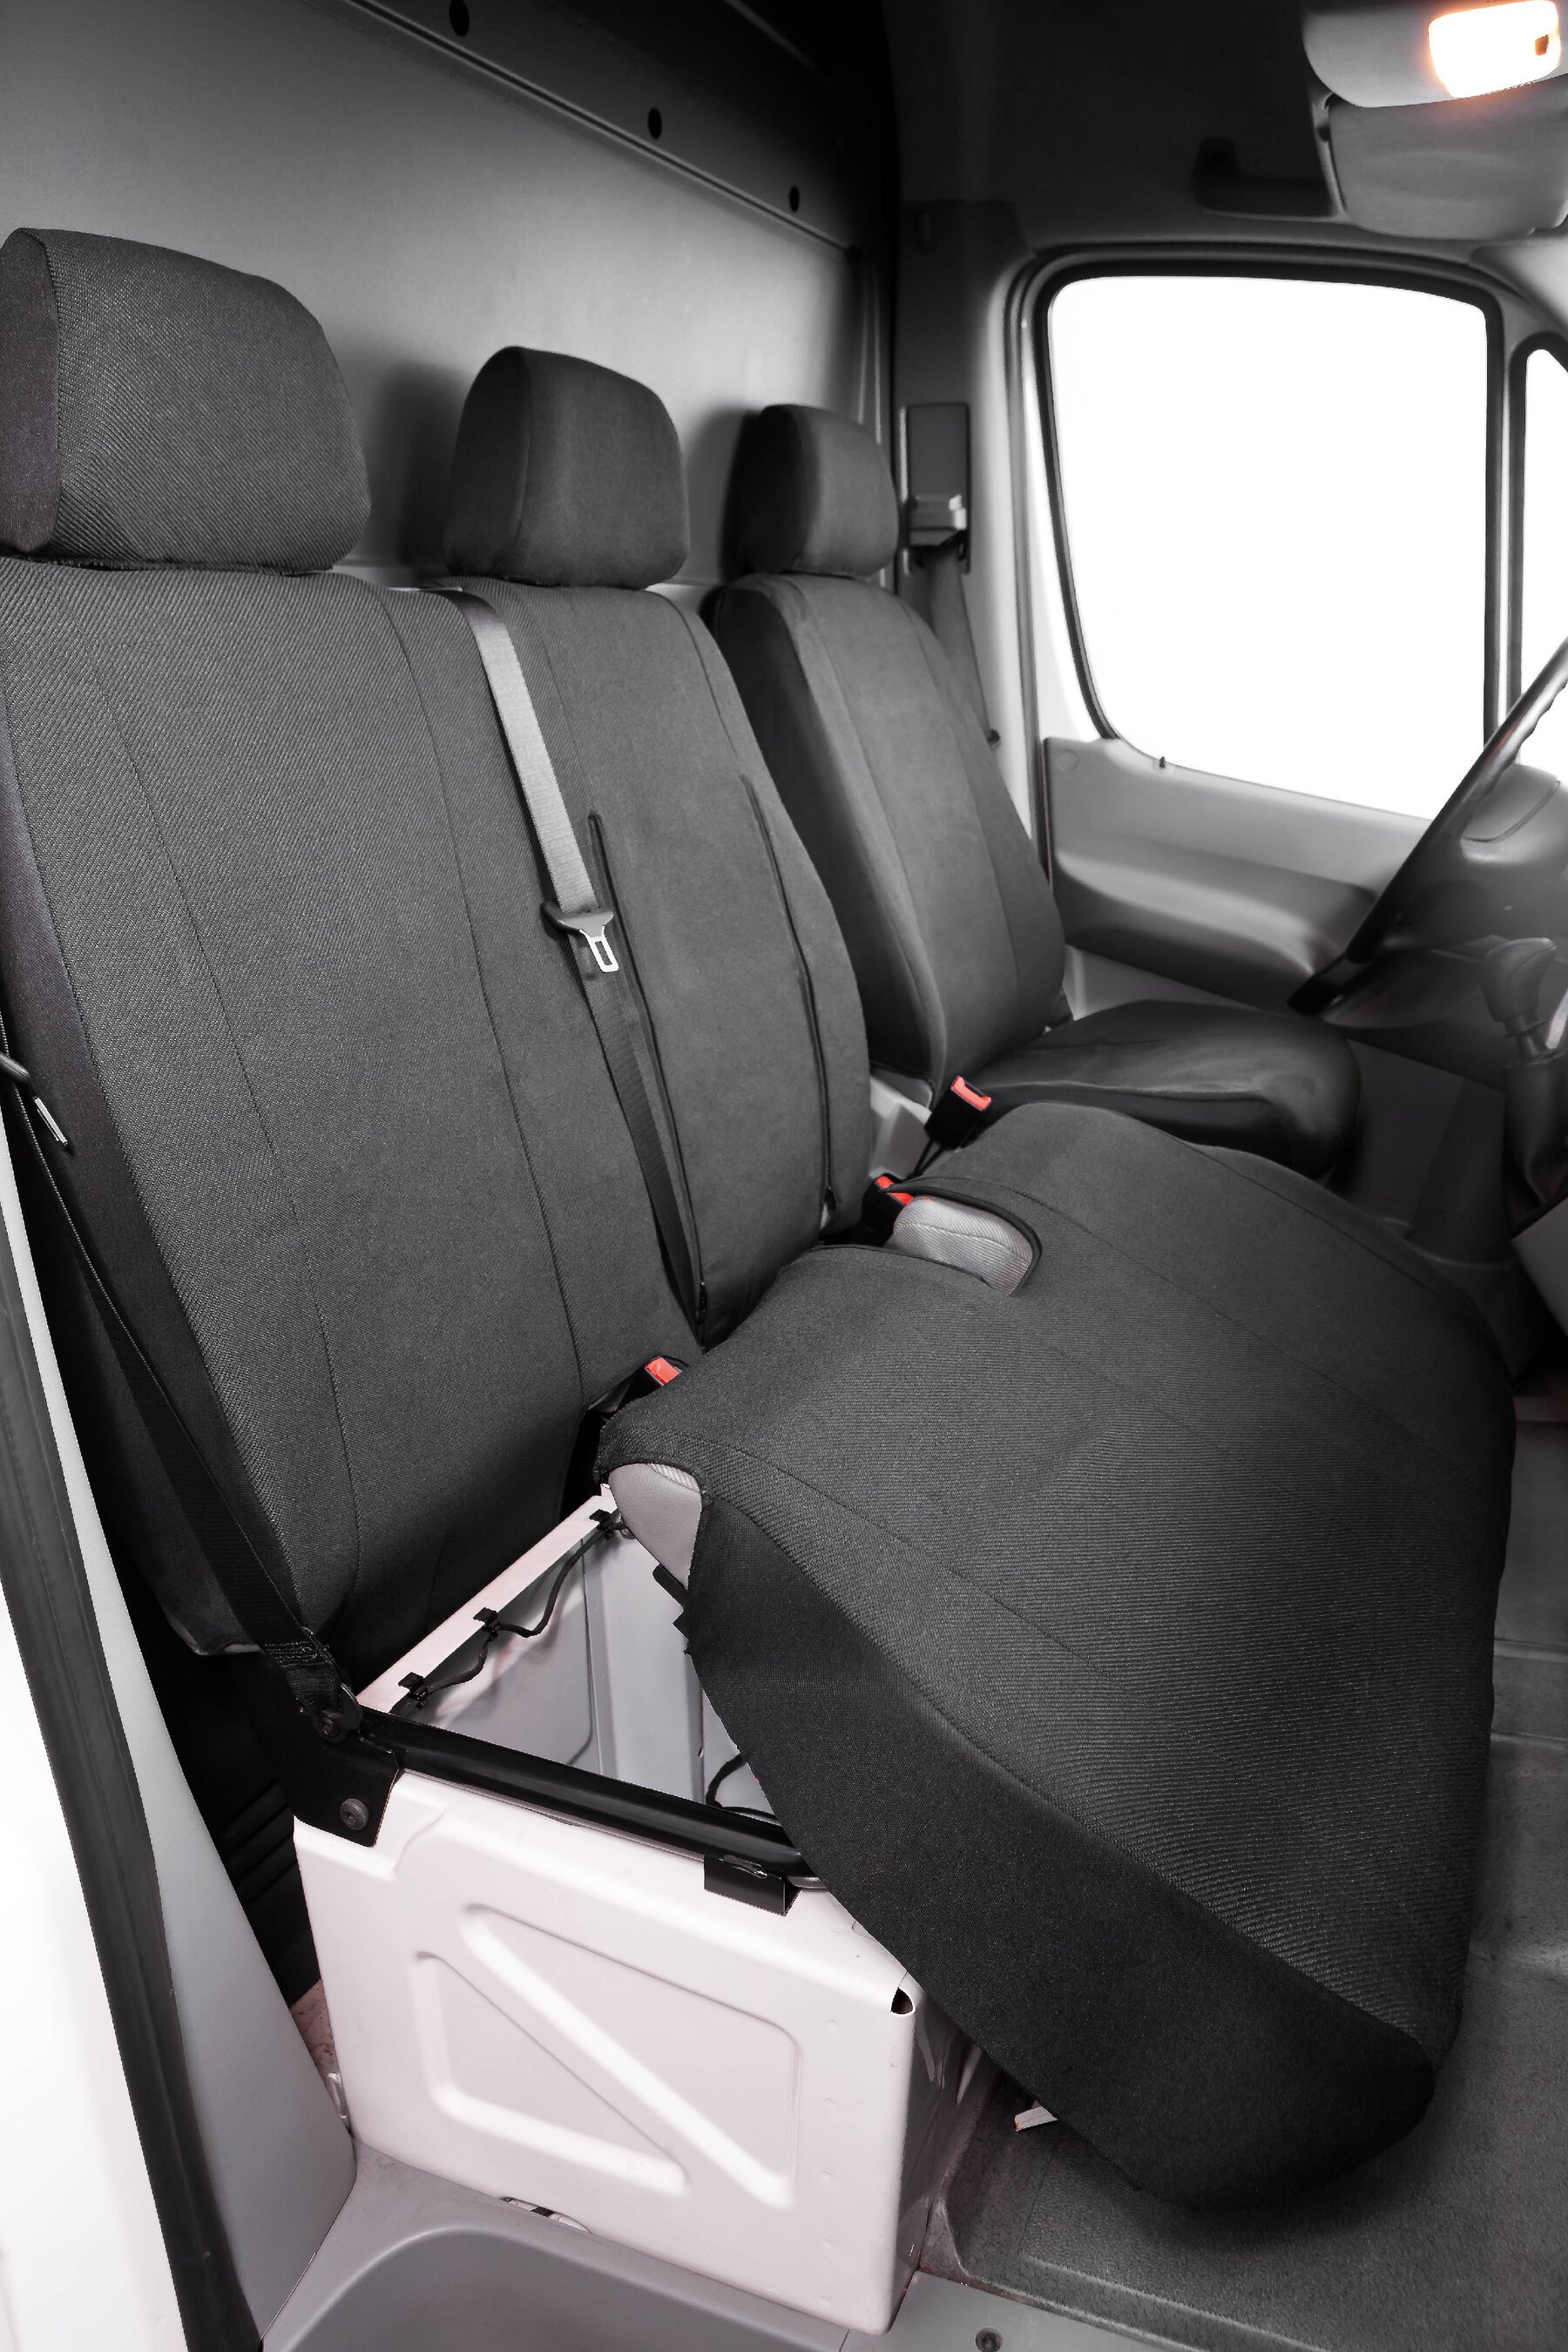 Car Seat cover Transporter made of fabric for VW Crafter, Mercedes Sprinter, single & double seat